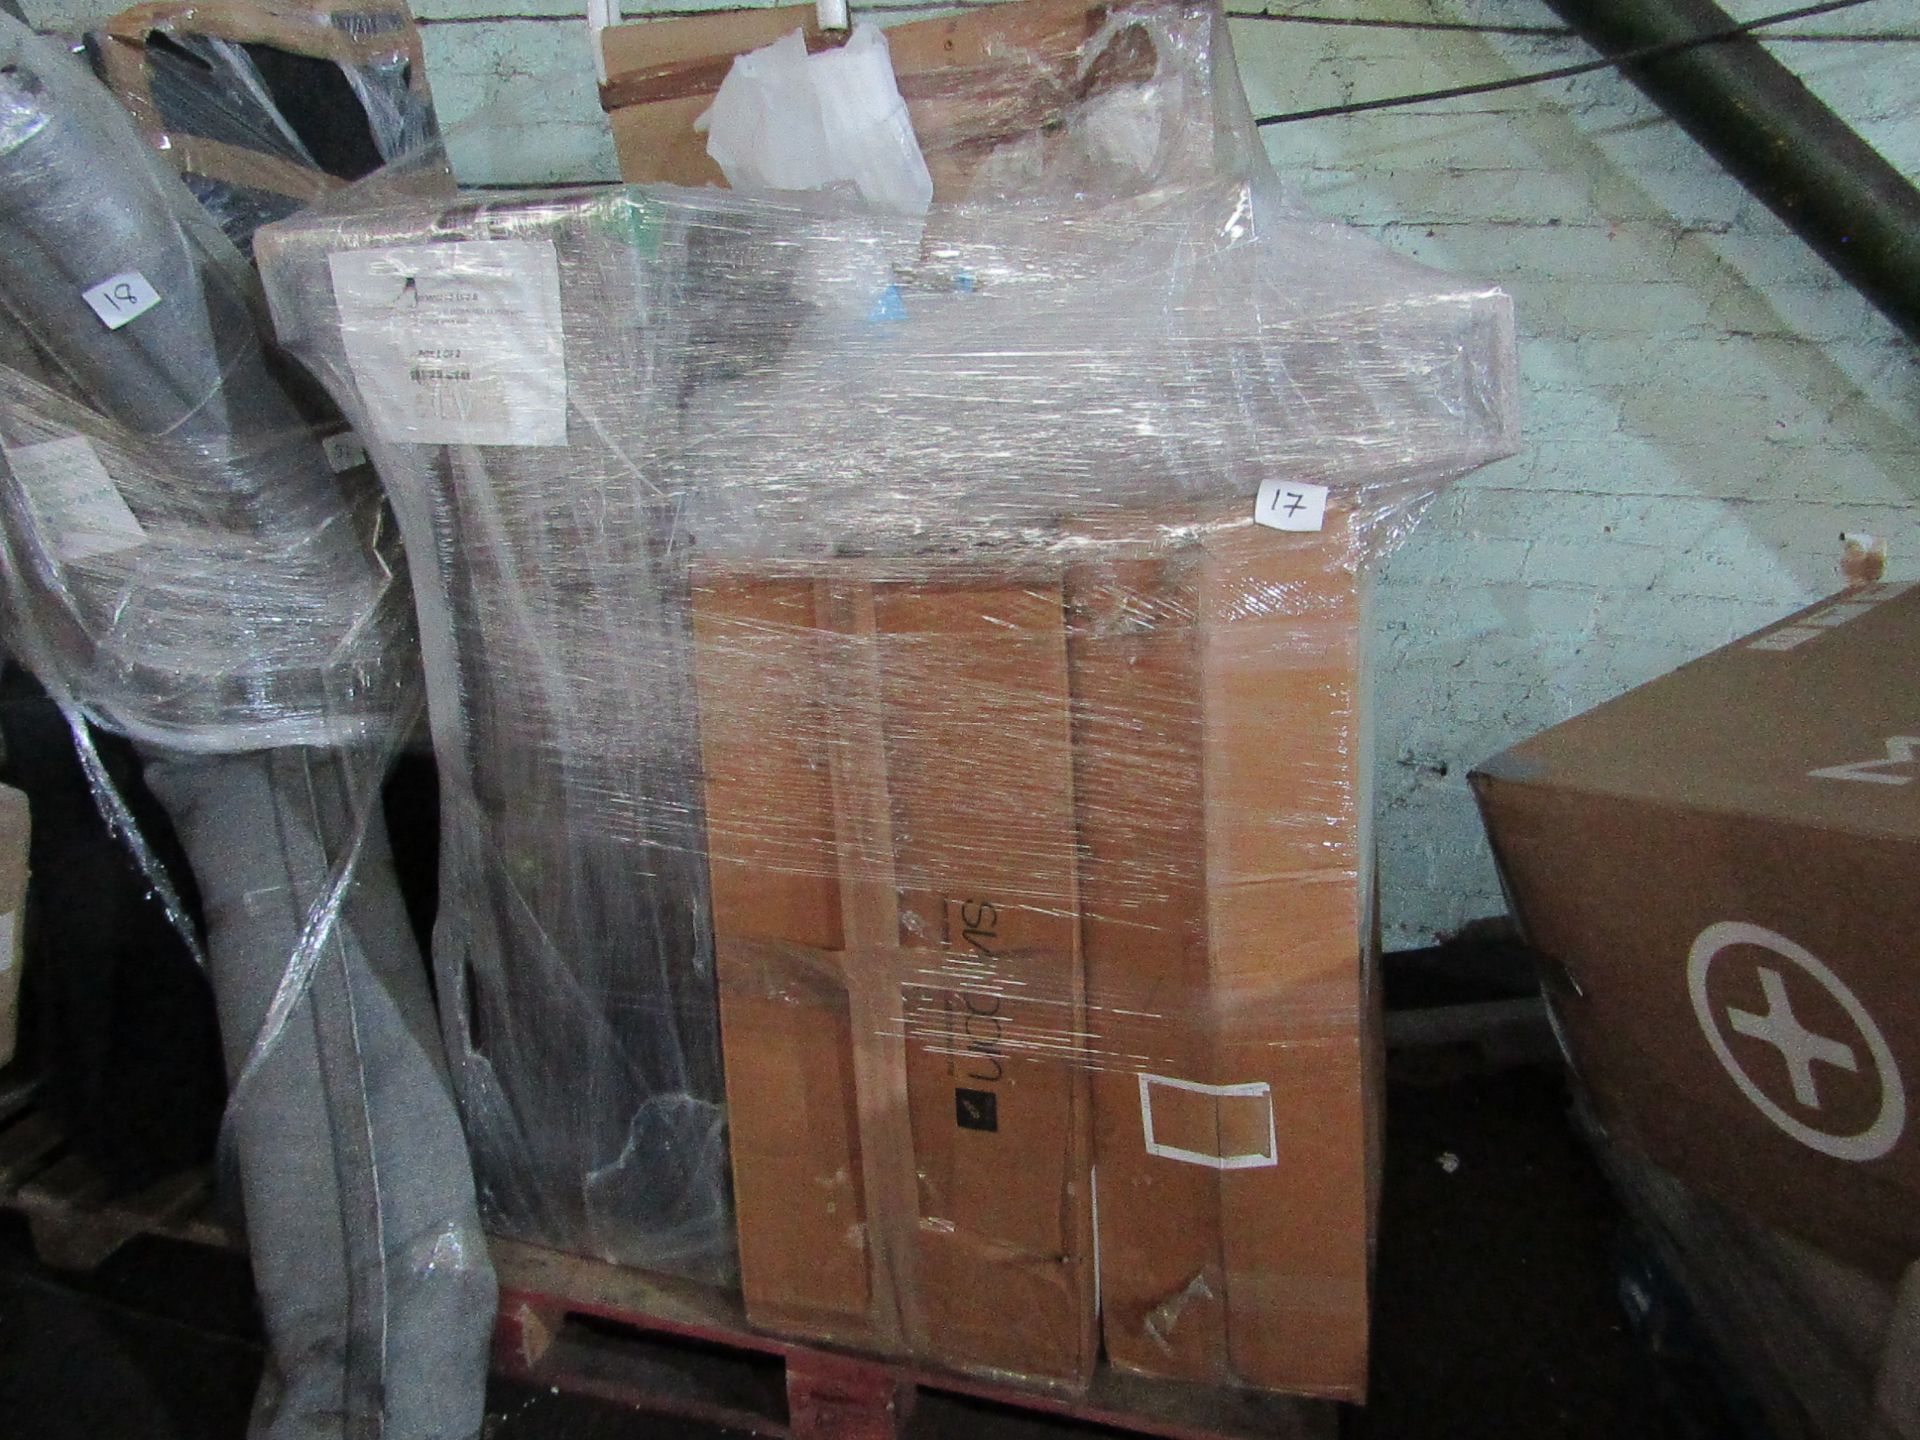 | 1X | PALLET OF FAULTY / MISSING PARTS / DAMAGED CUSTOMER RETURNS LOFT & SWOON STOCK UNMANIFESTED |